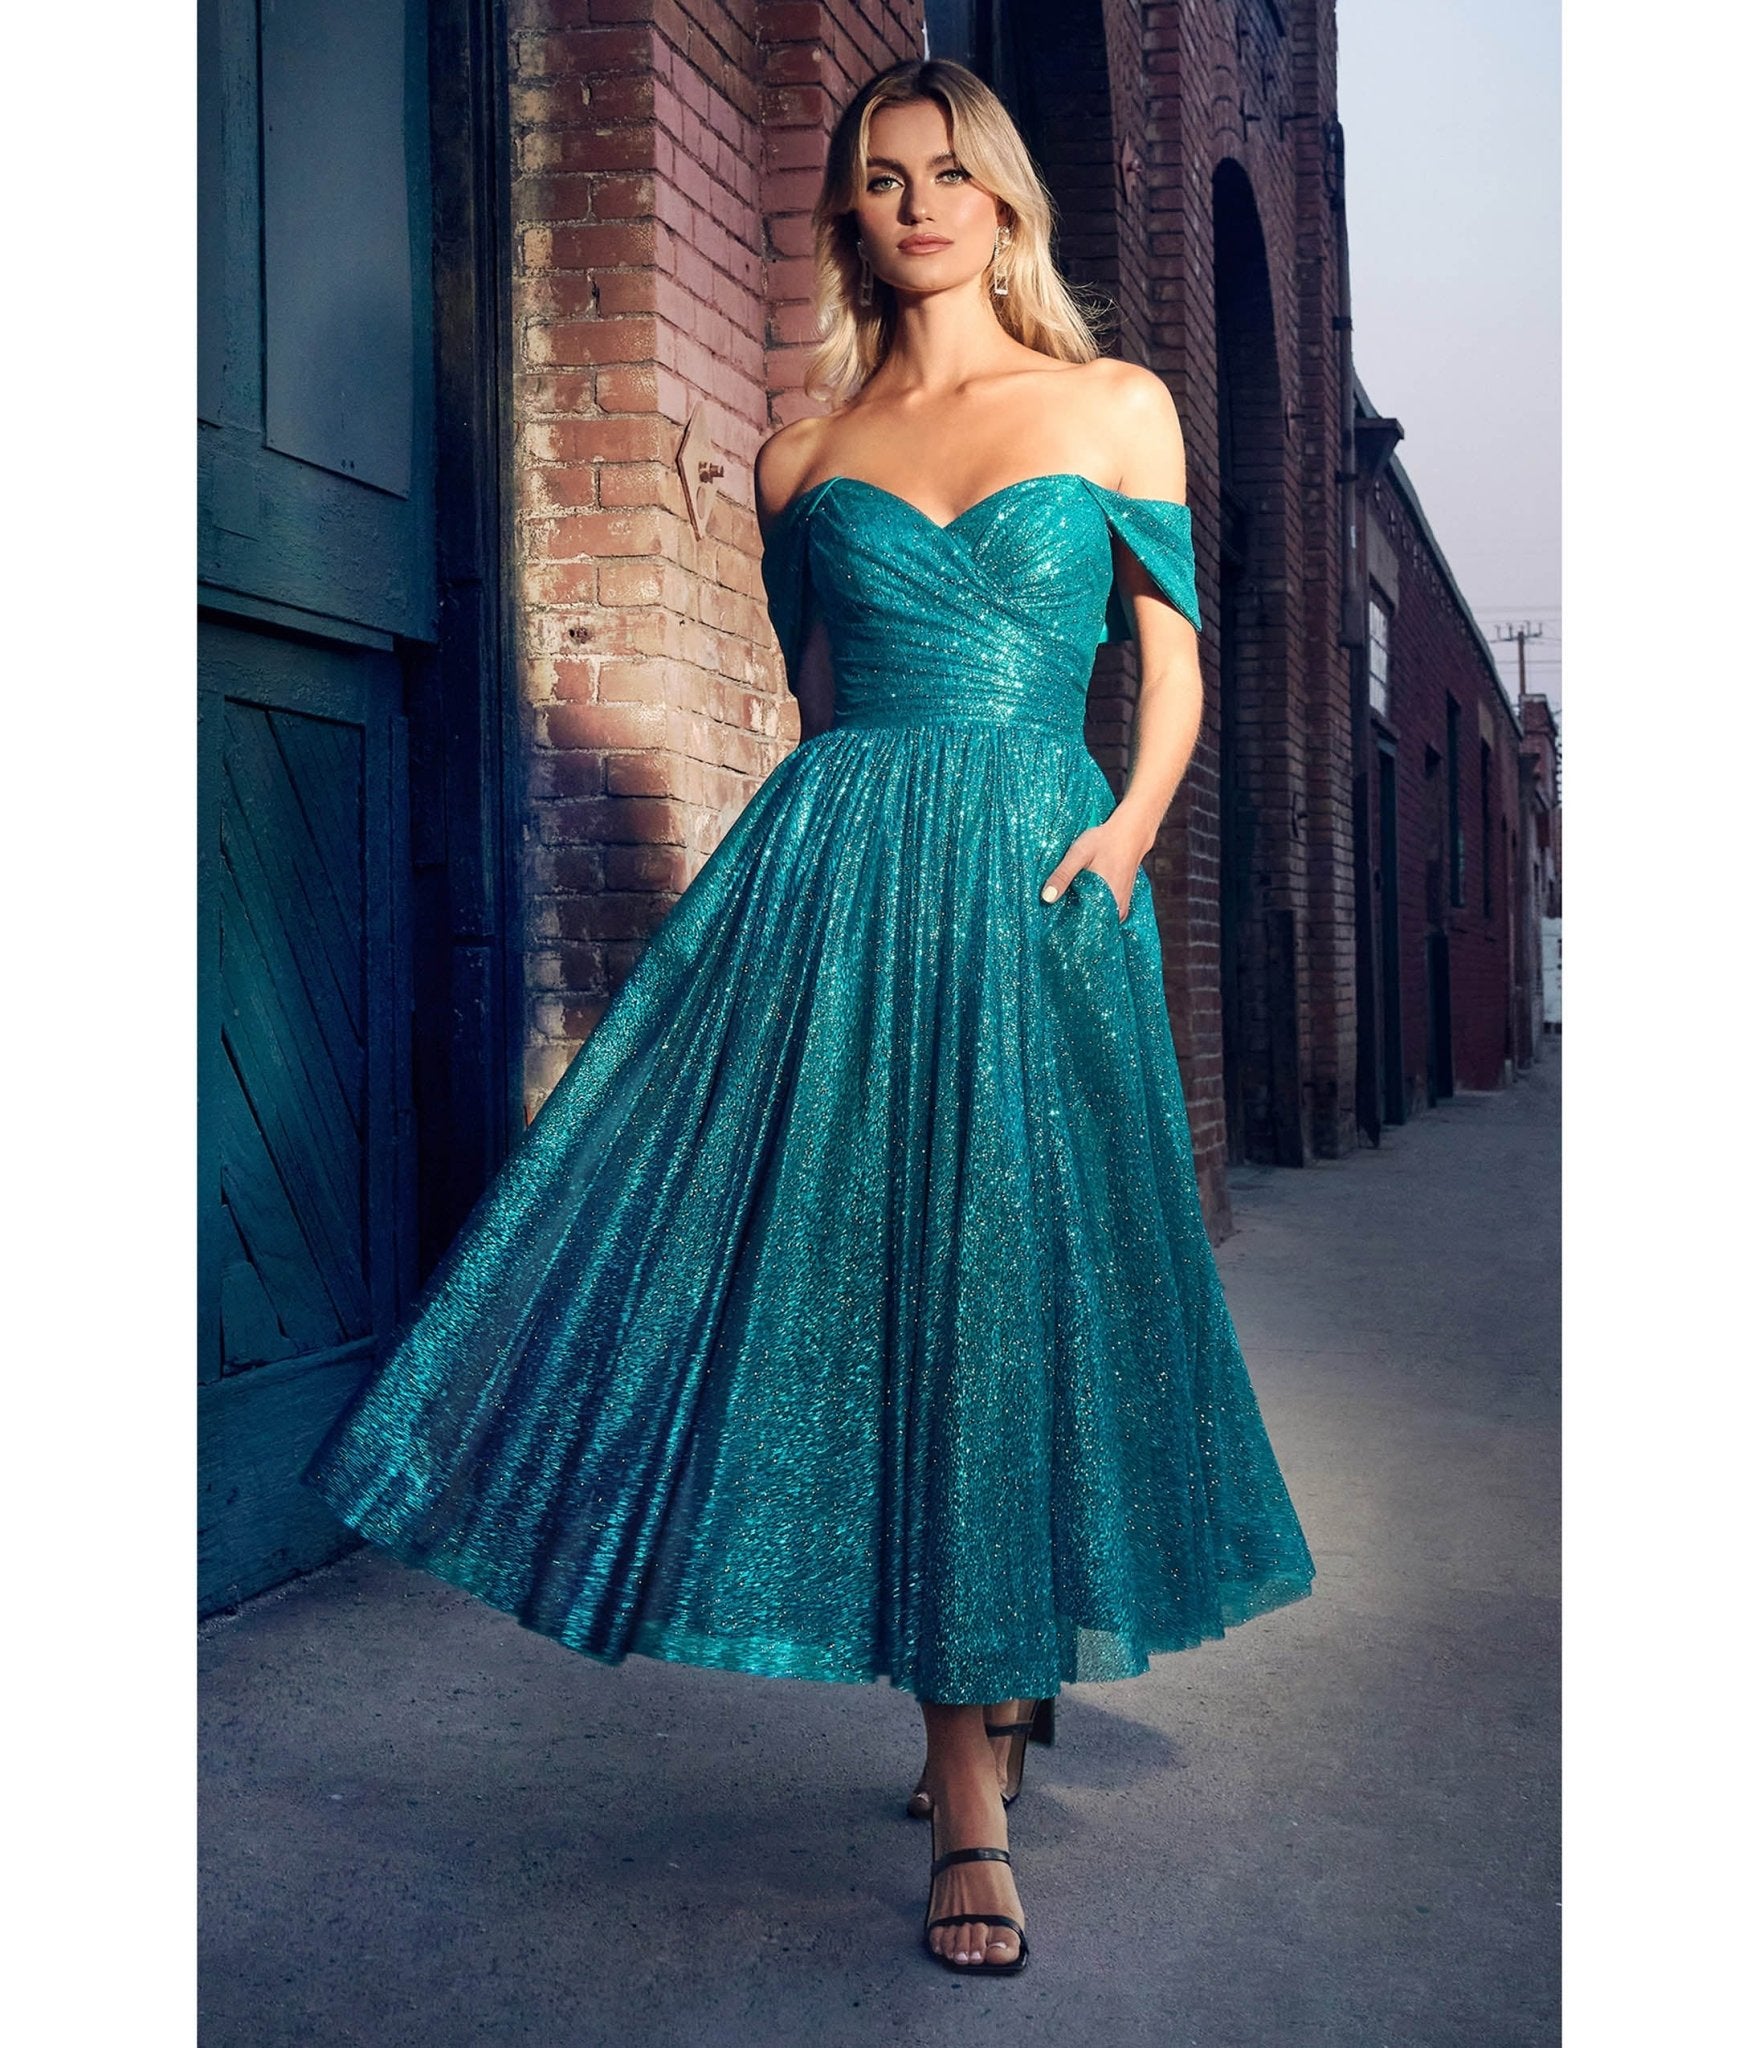 Turquoise Glitter Off The Shoulder Tea Length Dress - Unique Vintage - Womens, DRESSES, PROM AND SPECIAL OCCASION